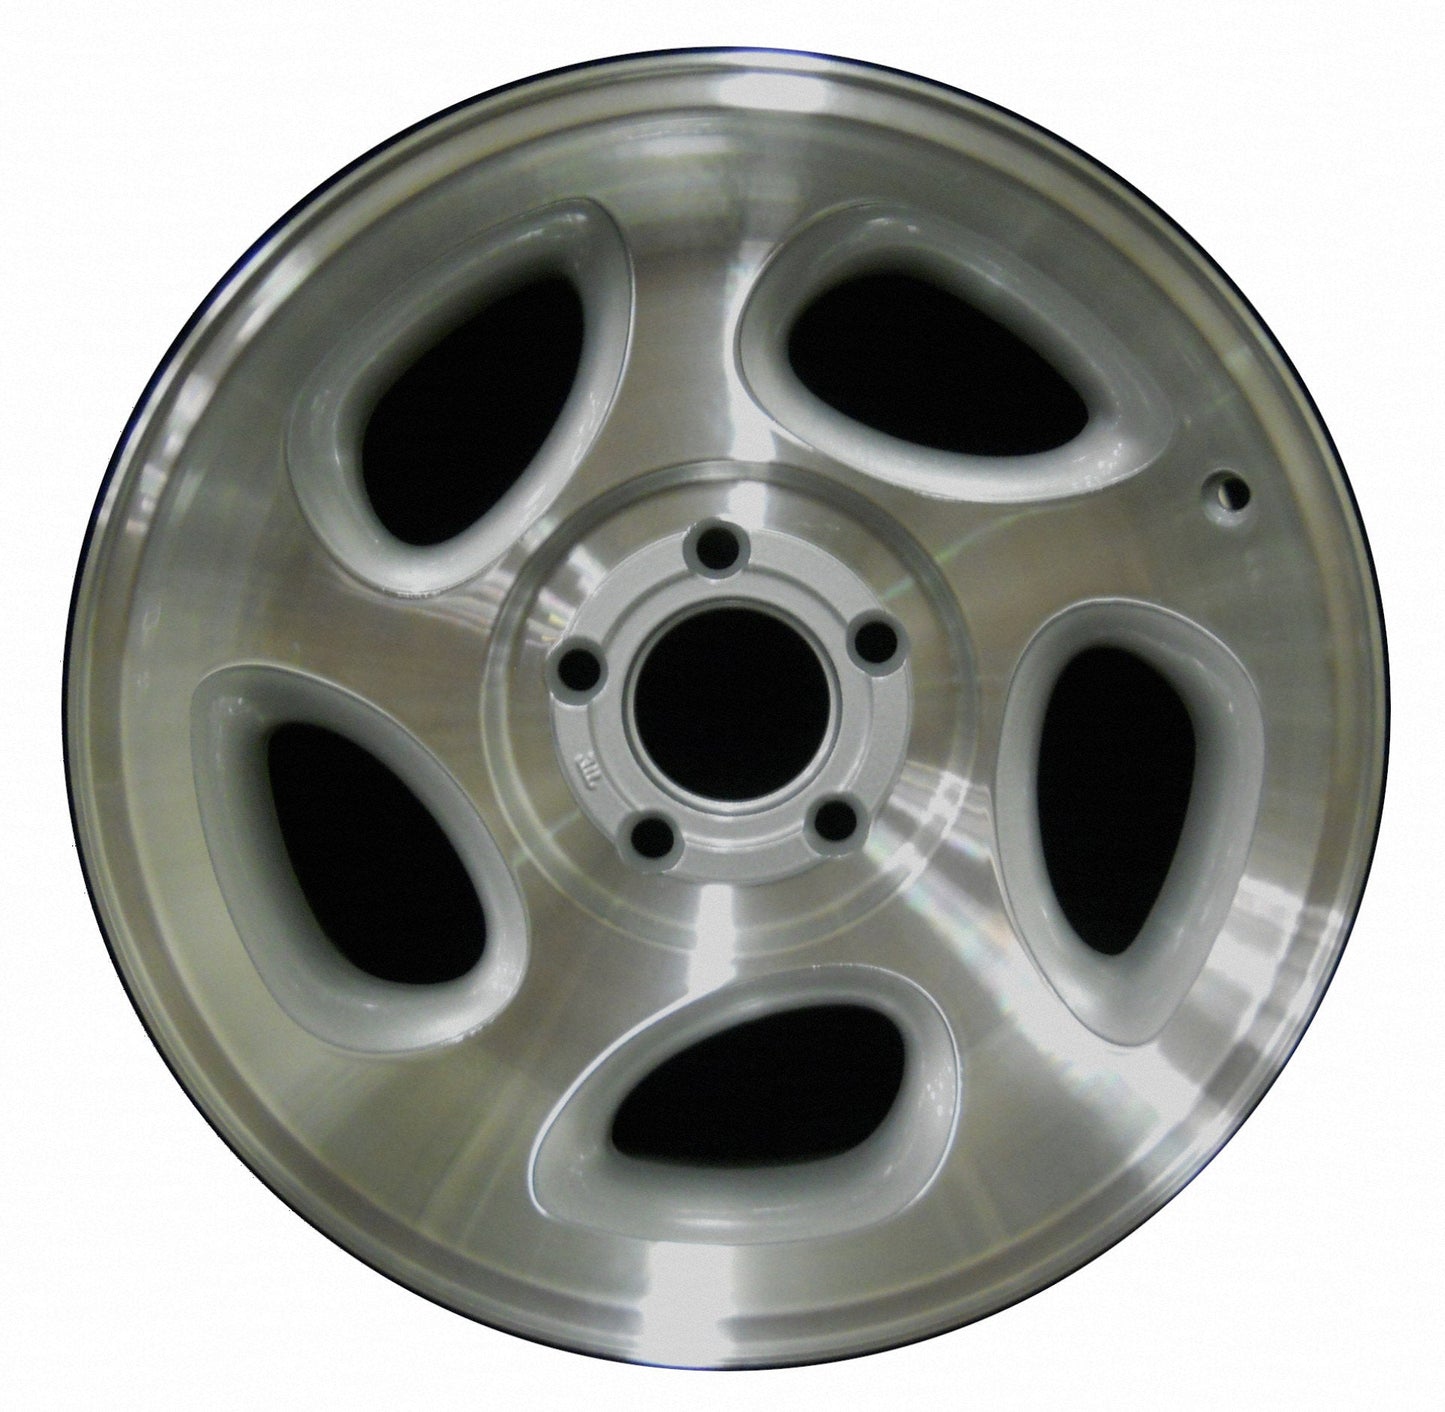 Ford Explorer  1998, 1999, 2000 Factory OEM Car Wheel Size 16x7 Alloy WAO.3293B.PS02.MA